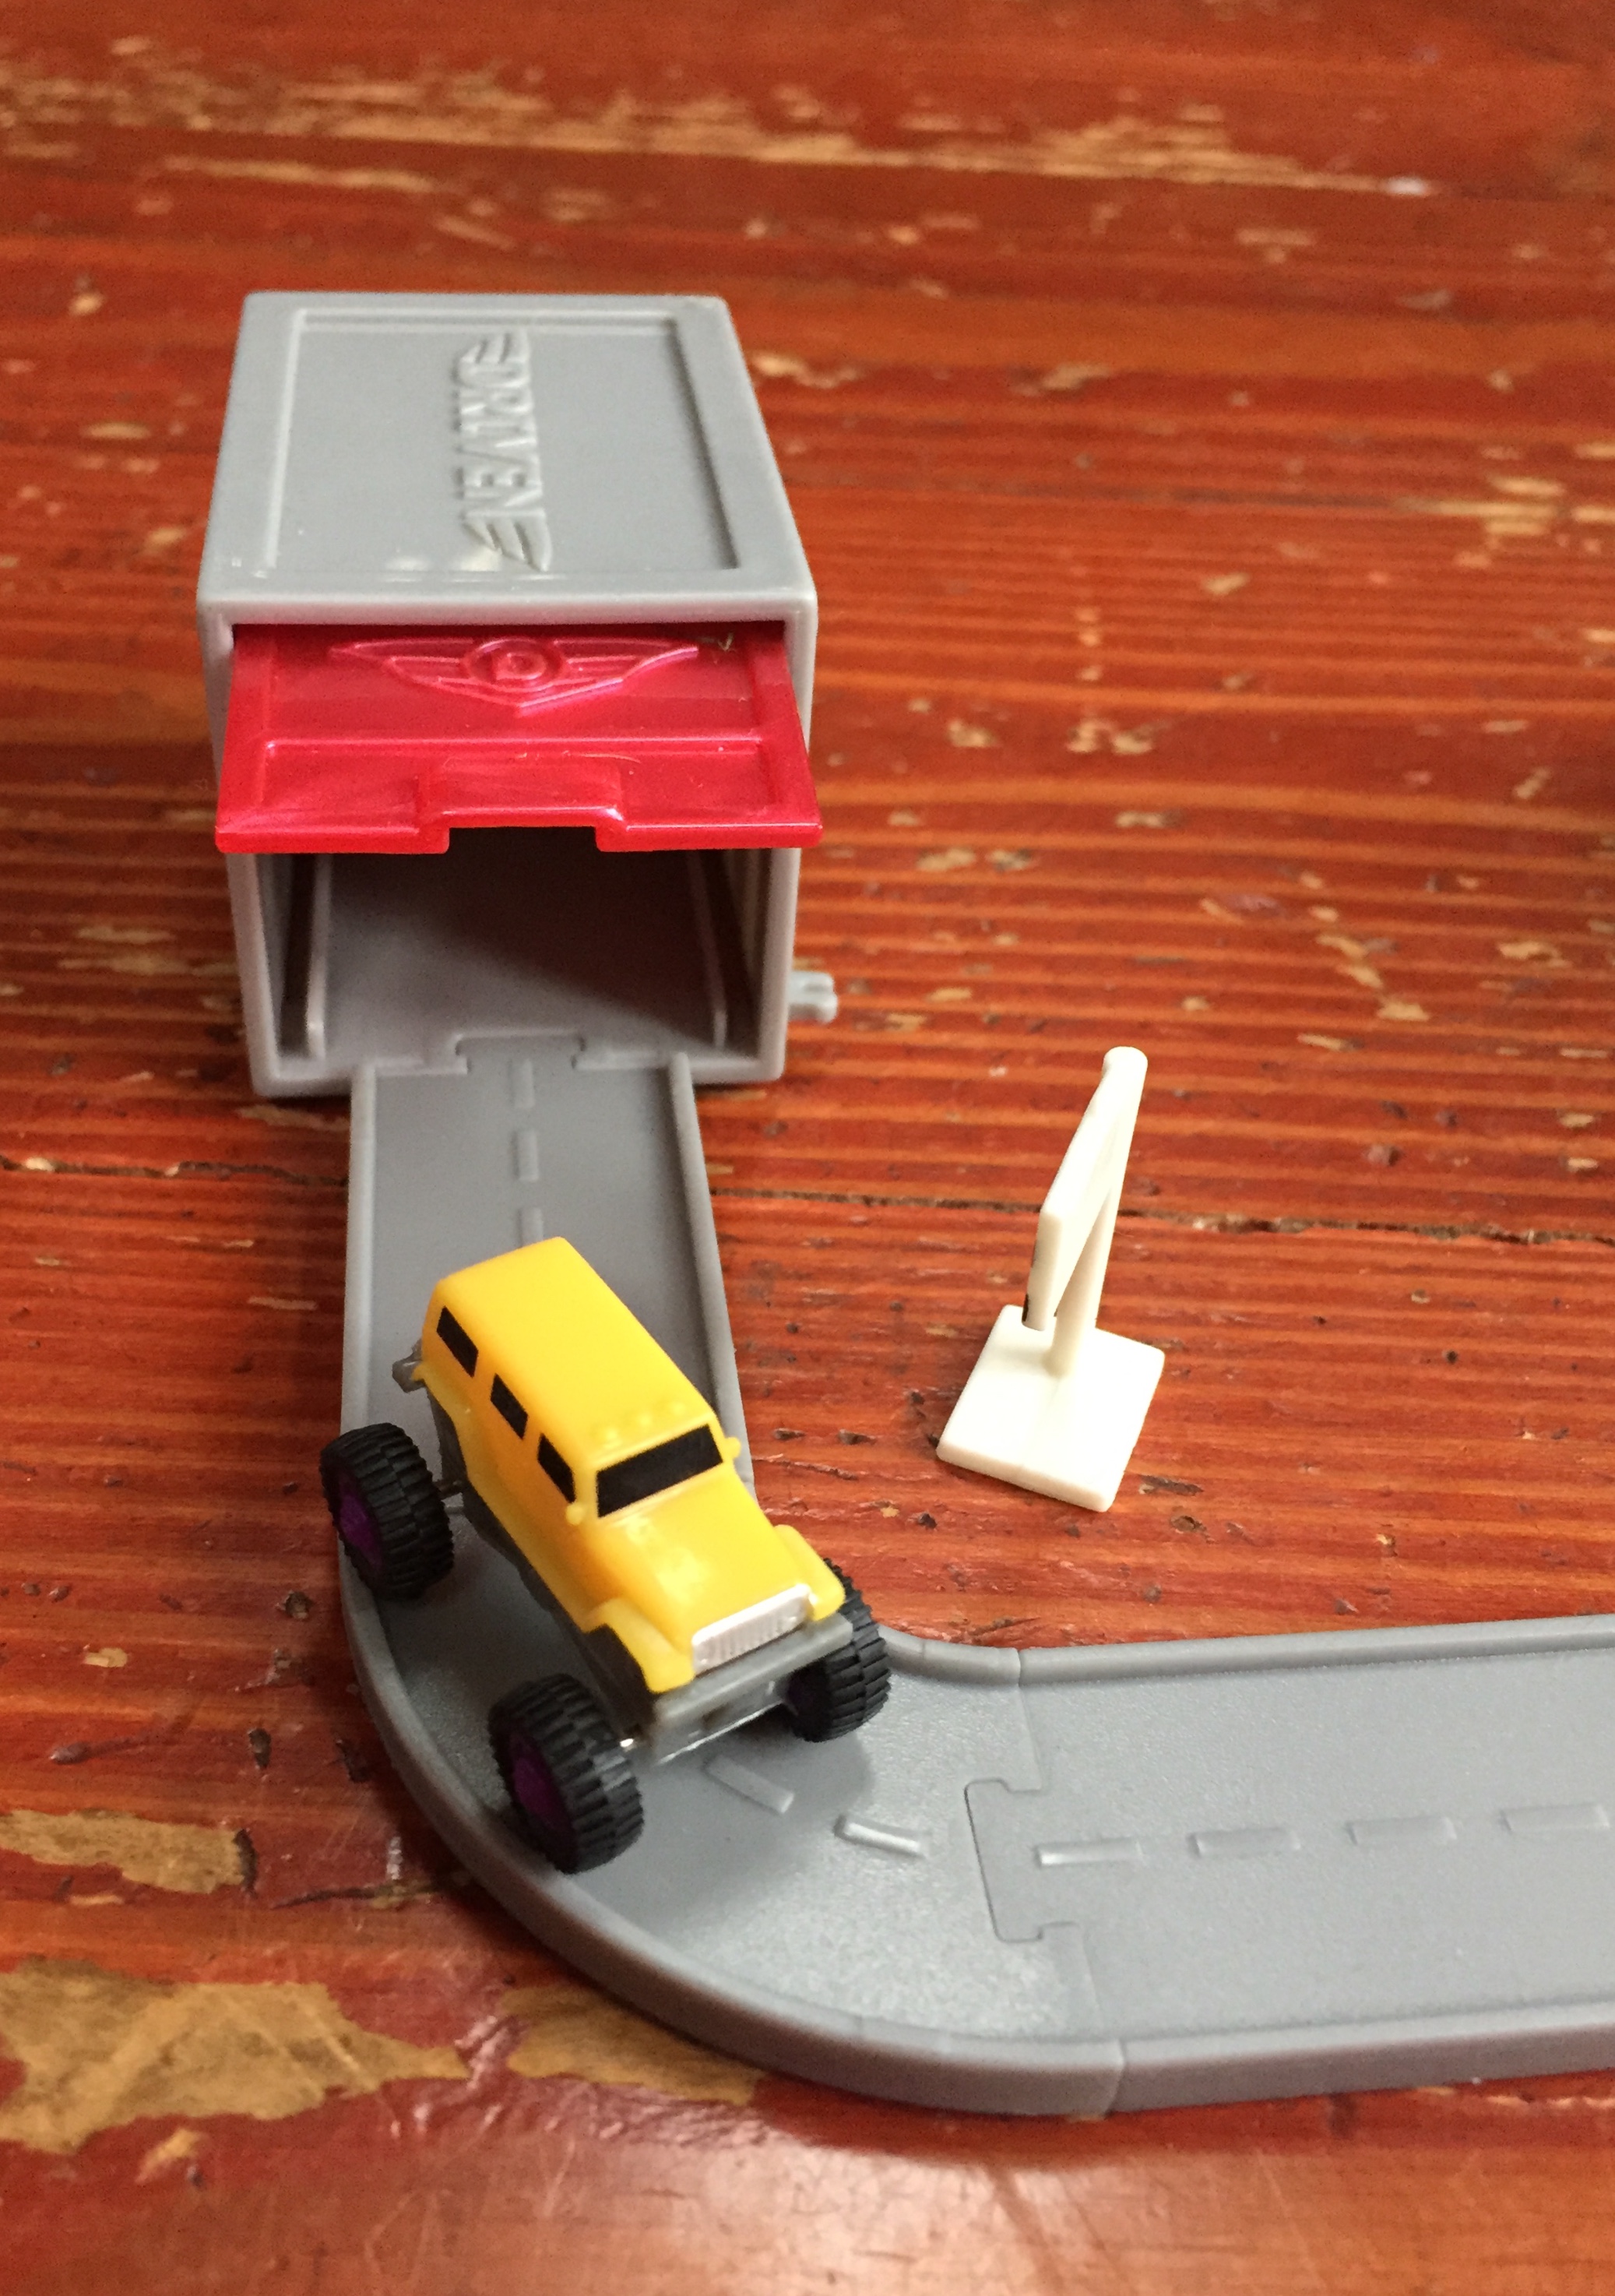 Driven Pocket Series 3 tiny garage with yellow truck with monster wheels